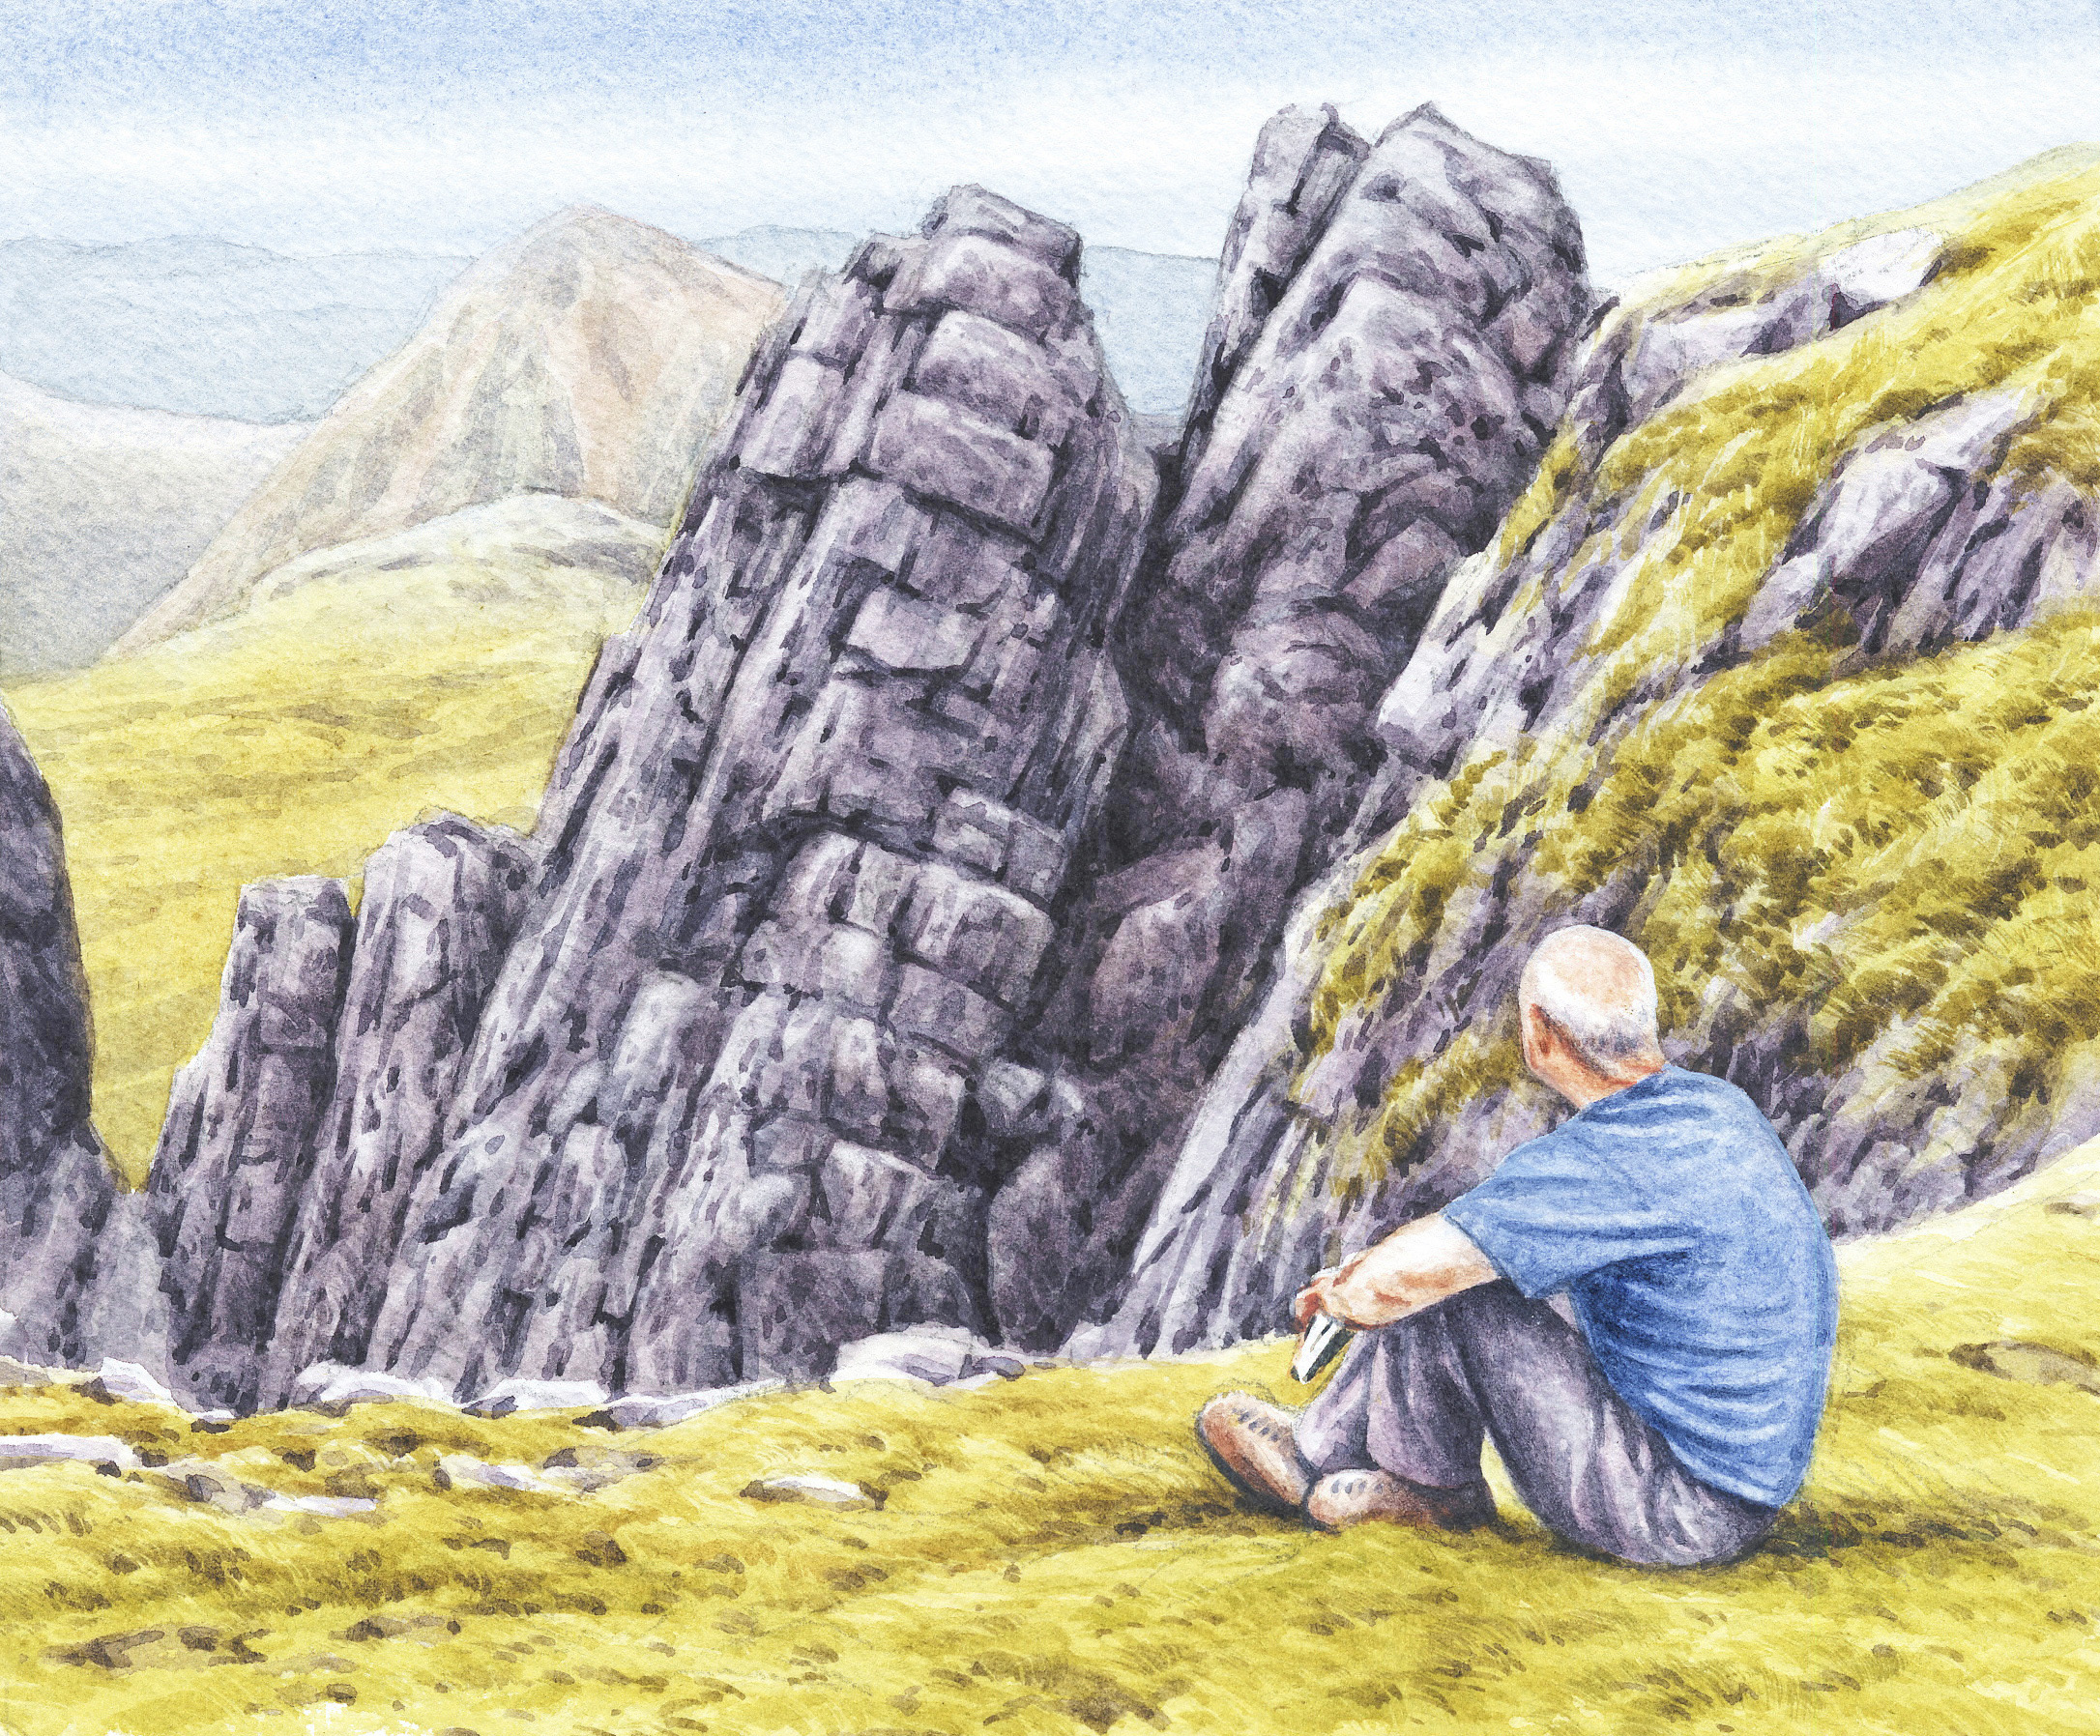 Artist recreates Wainwright's famous pictorial guides in colour - The Westmorland Gazette